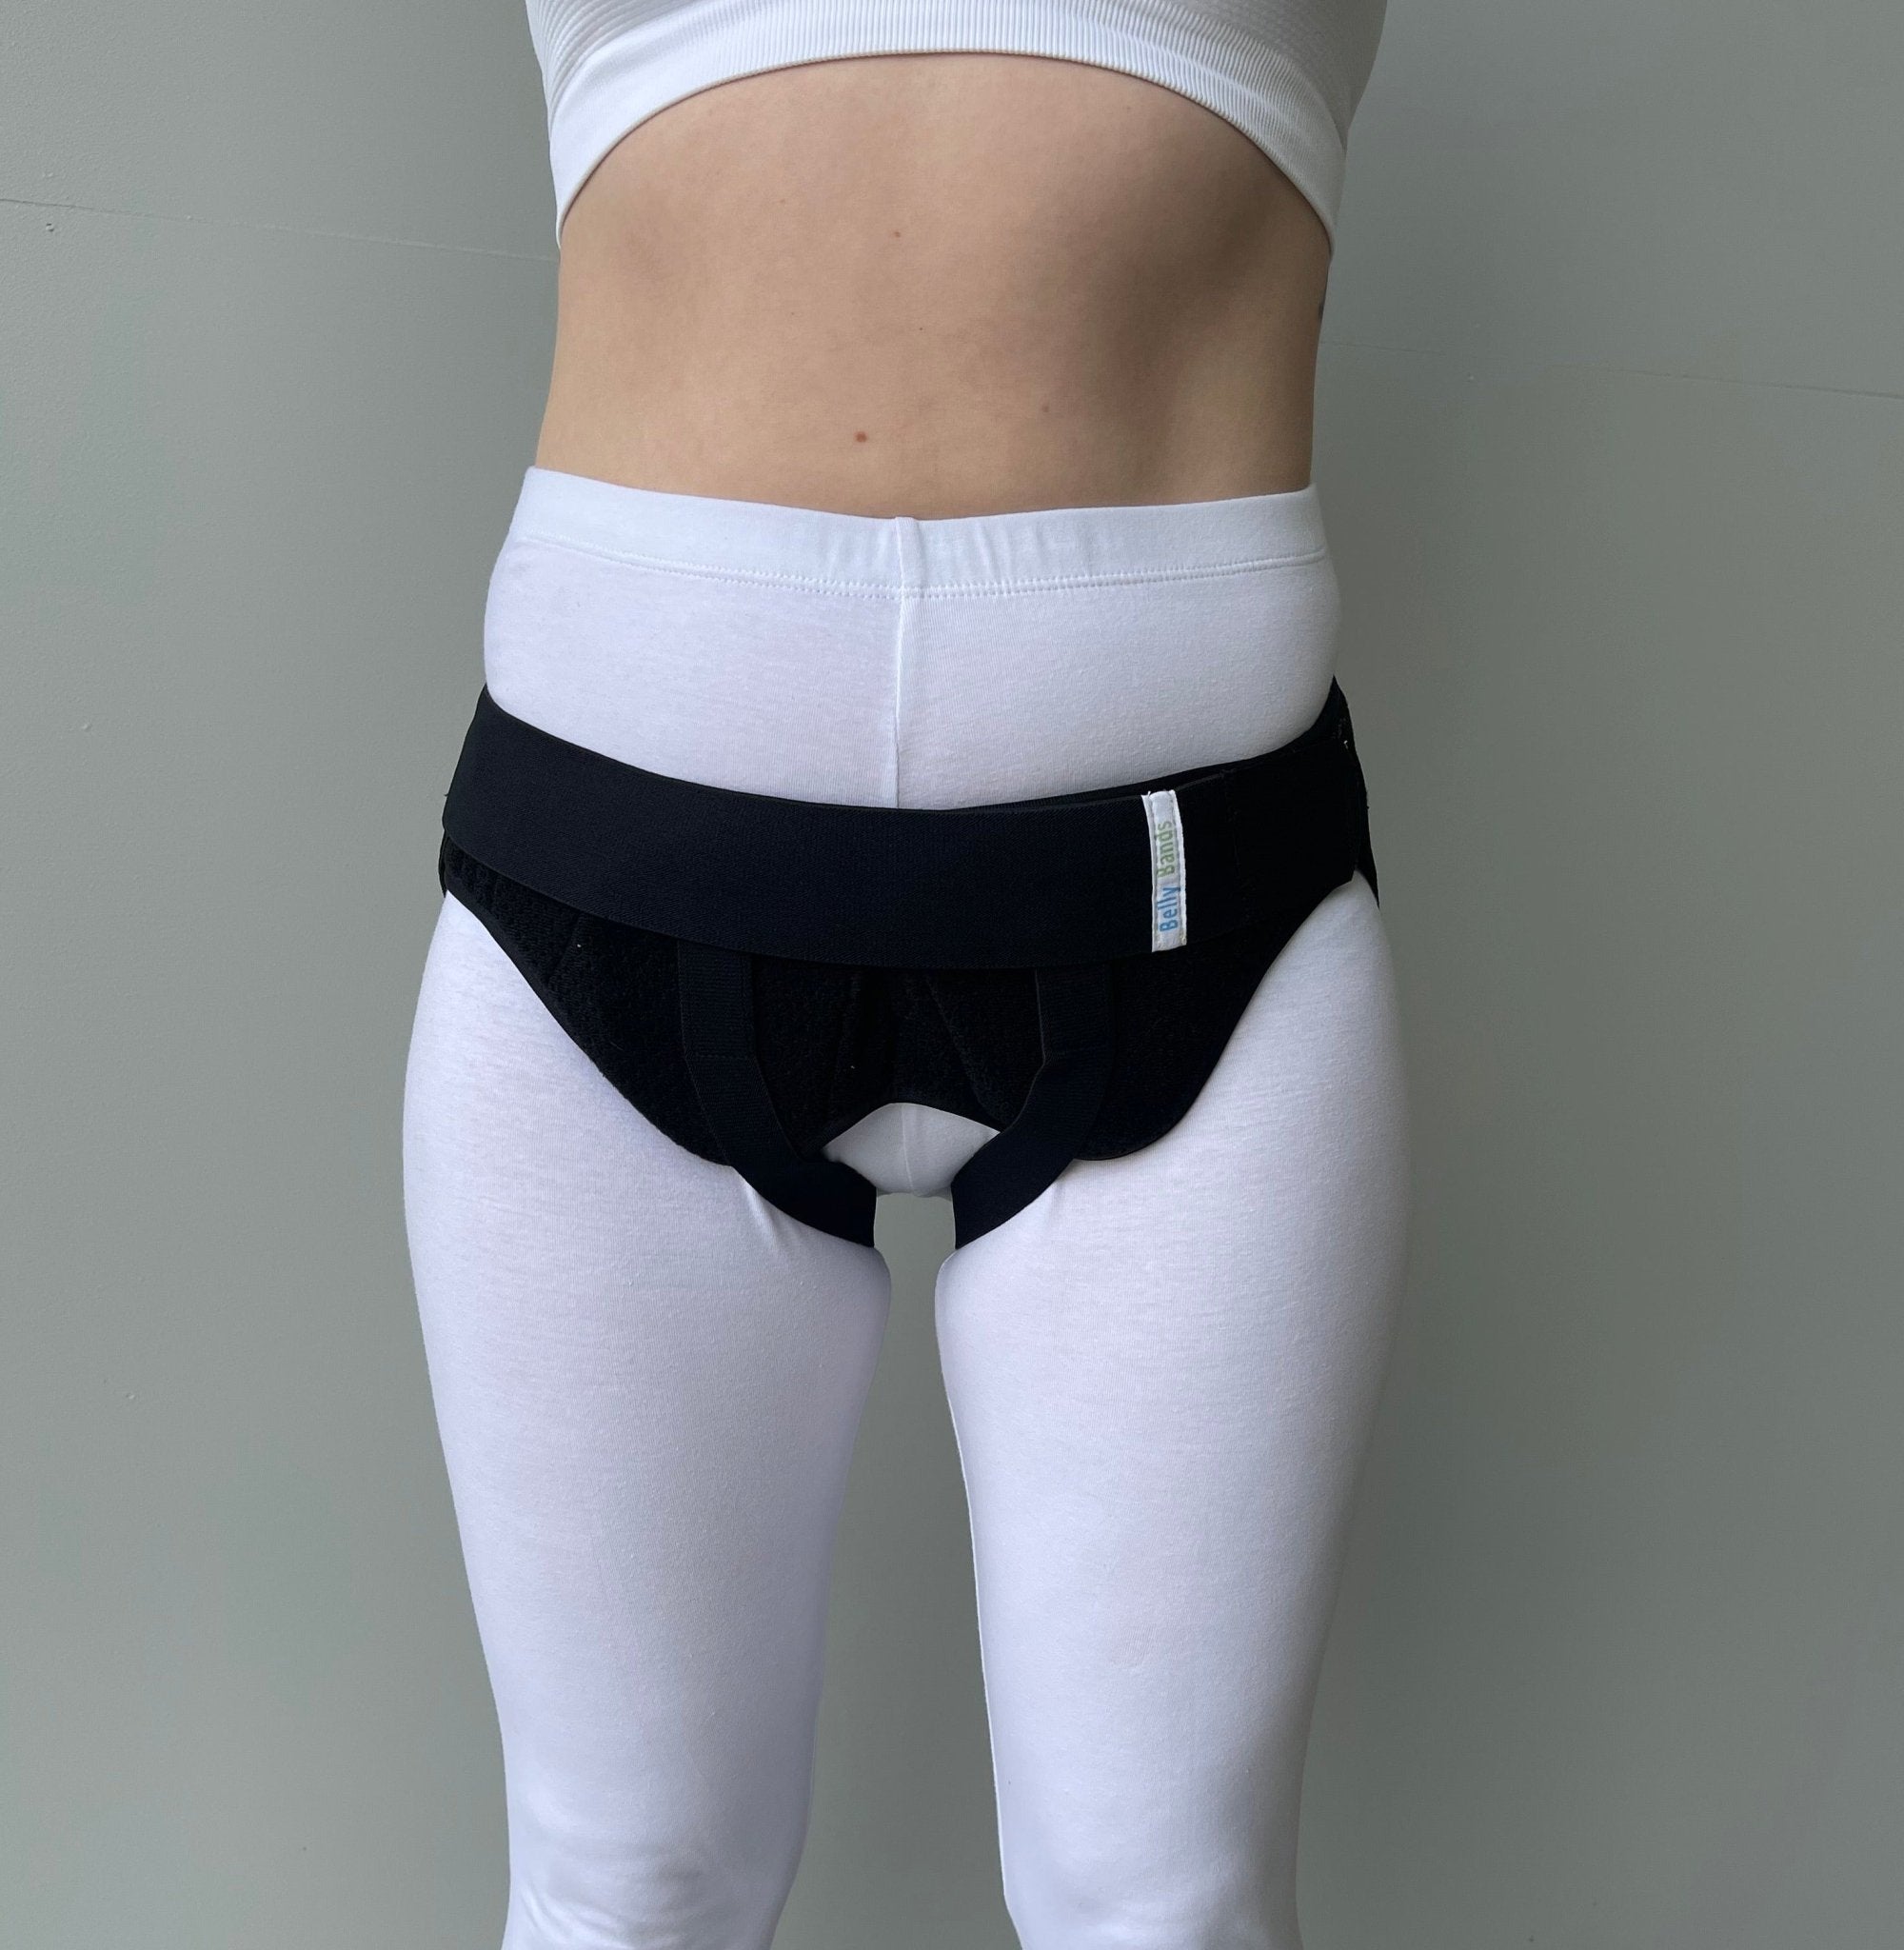 Fully Adjustable Hernia Belt for Abdominal and Inguinal Hernia